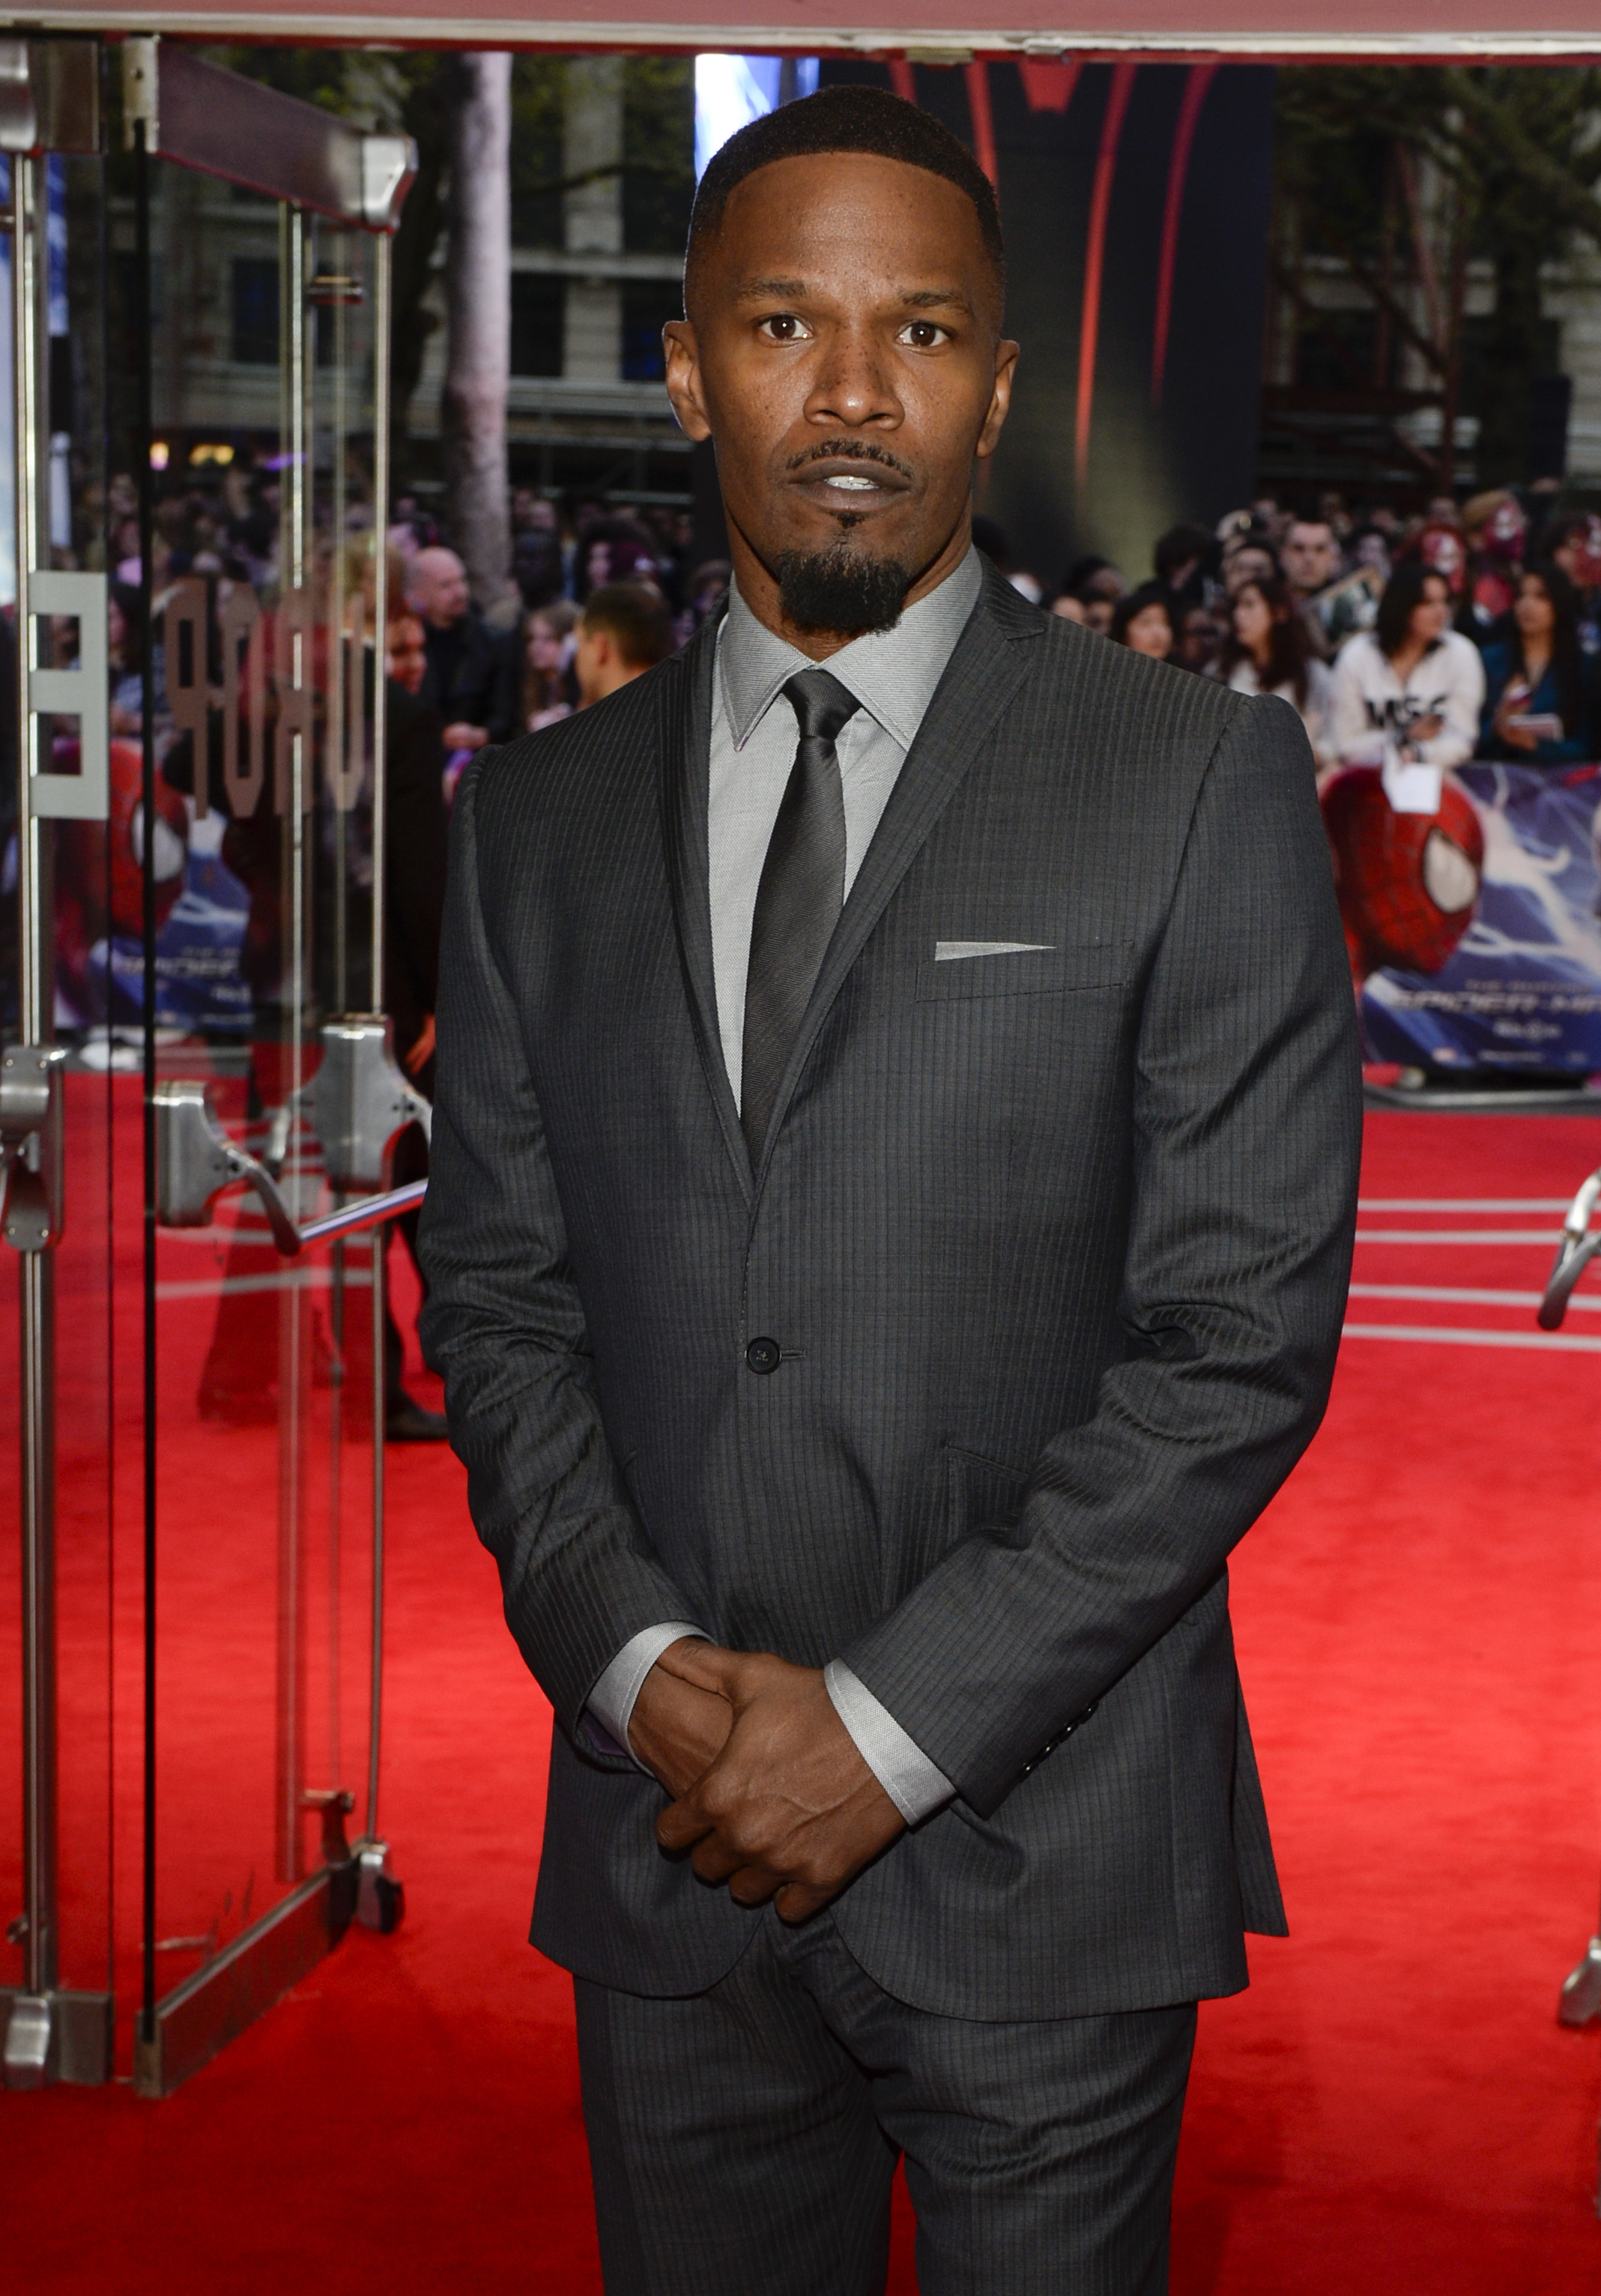 on the red carpet in a suit with a small beard and mustache